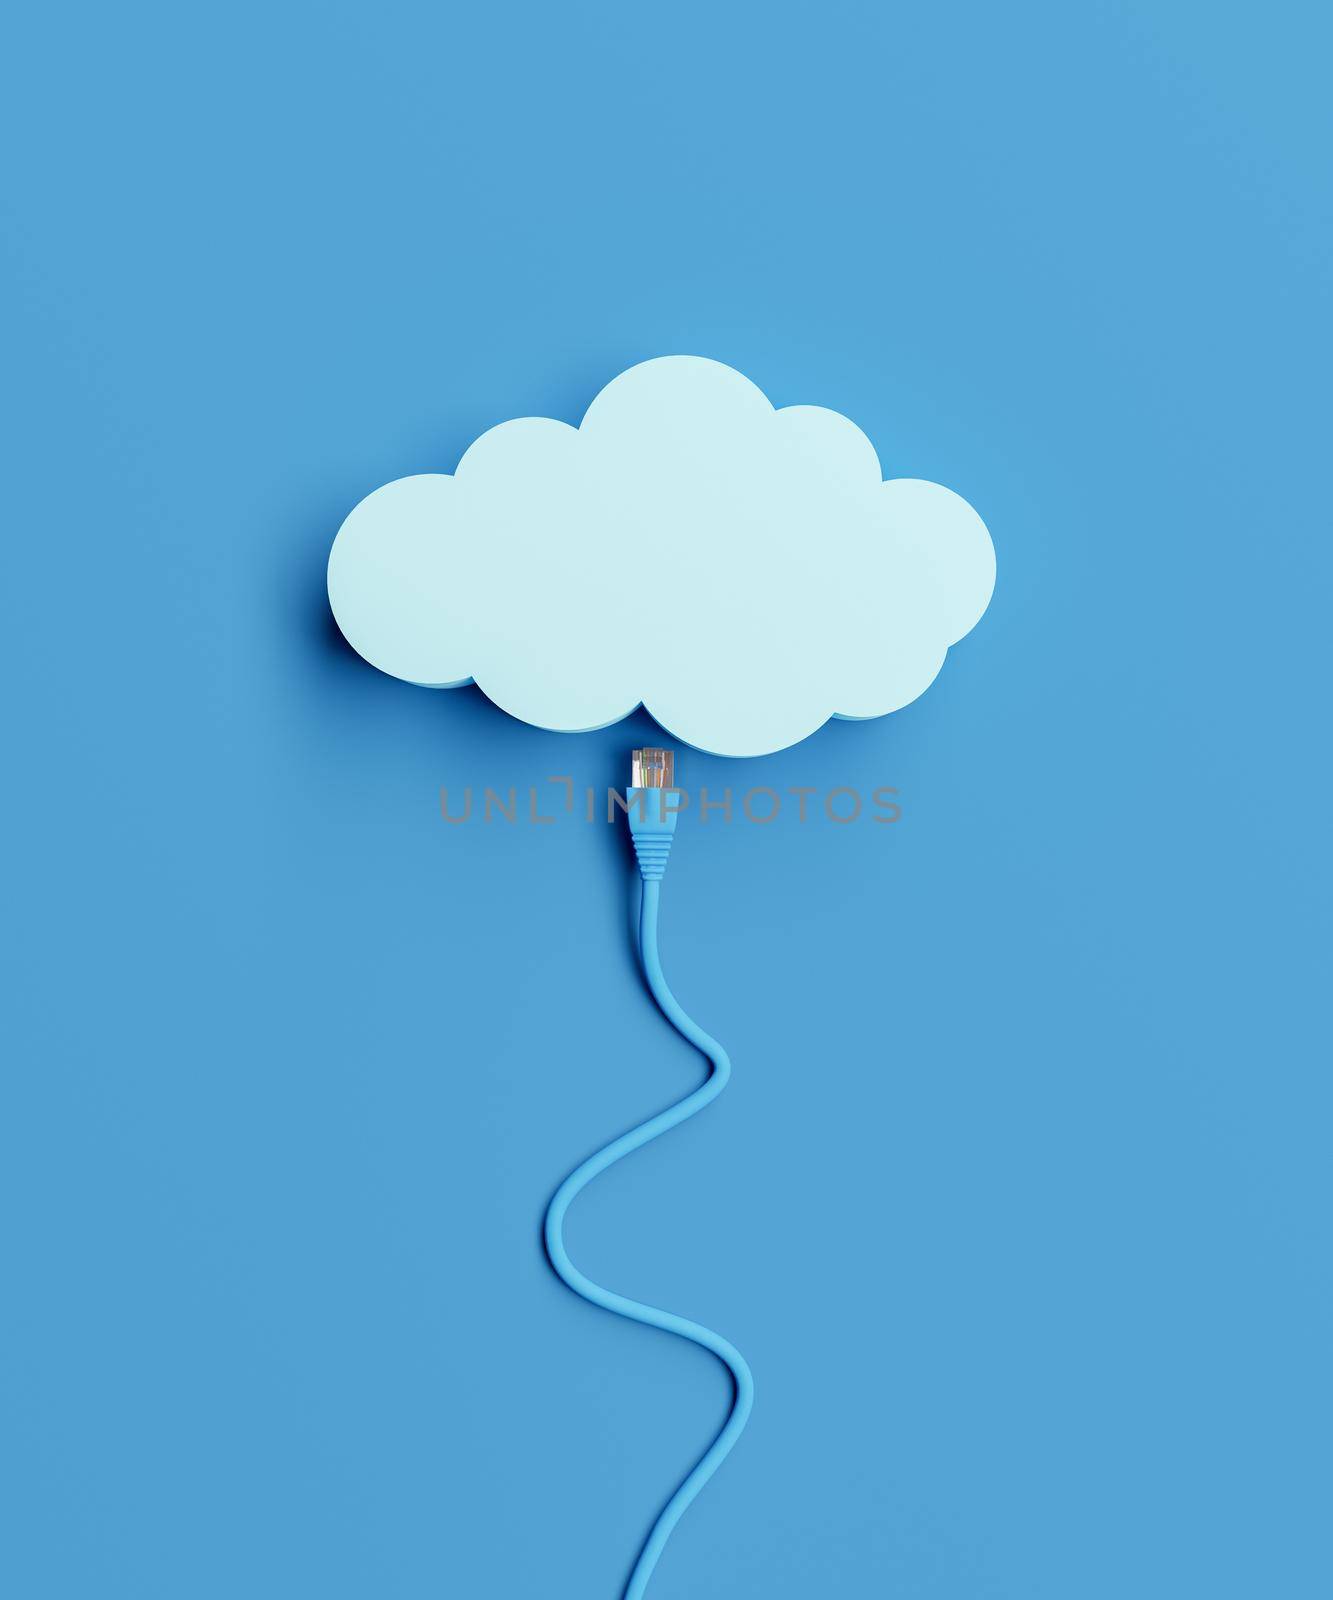 cartoon cloud with an ethernet cable by asolano